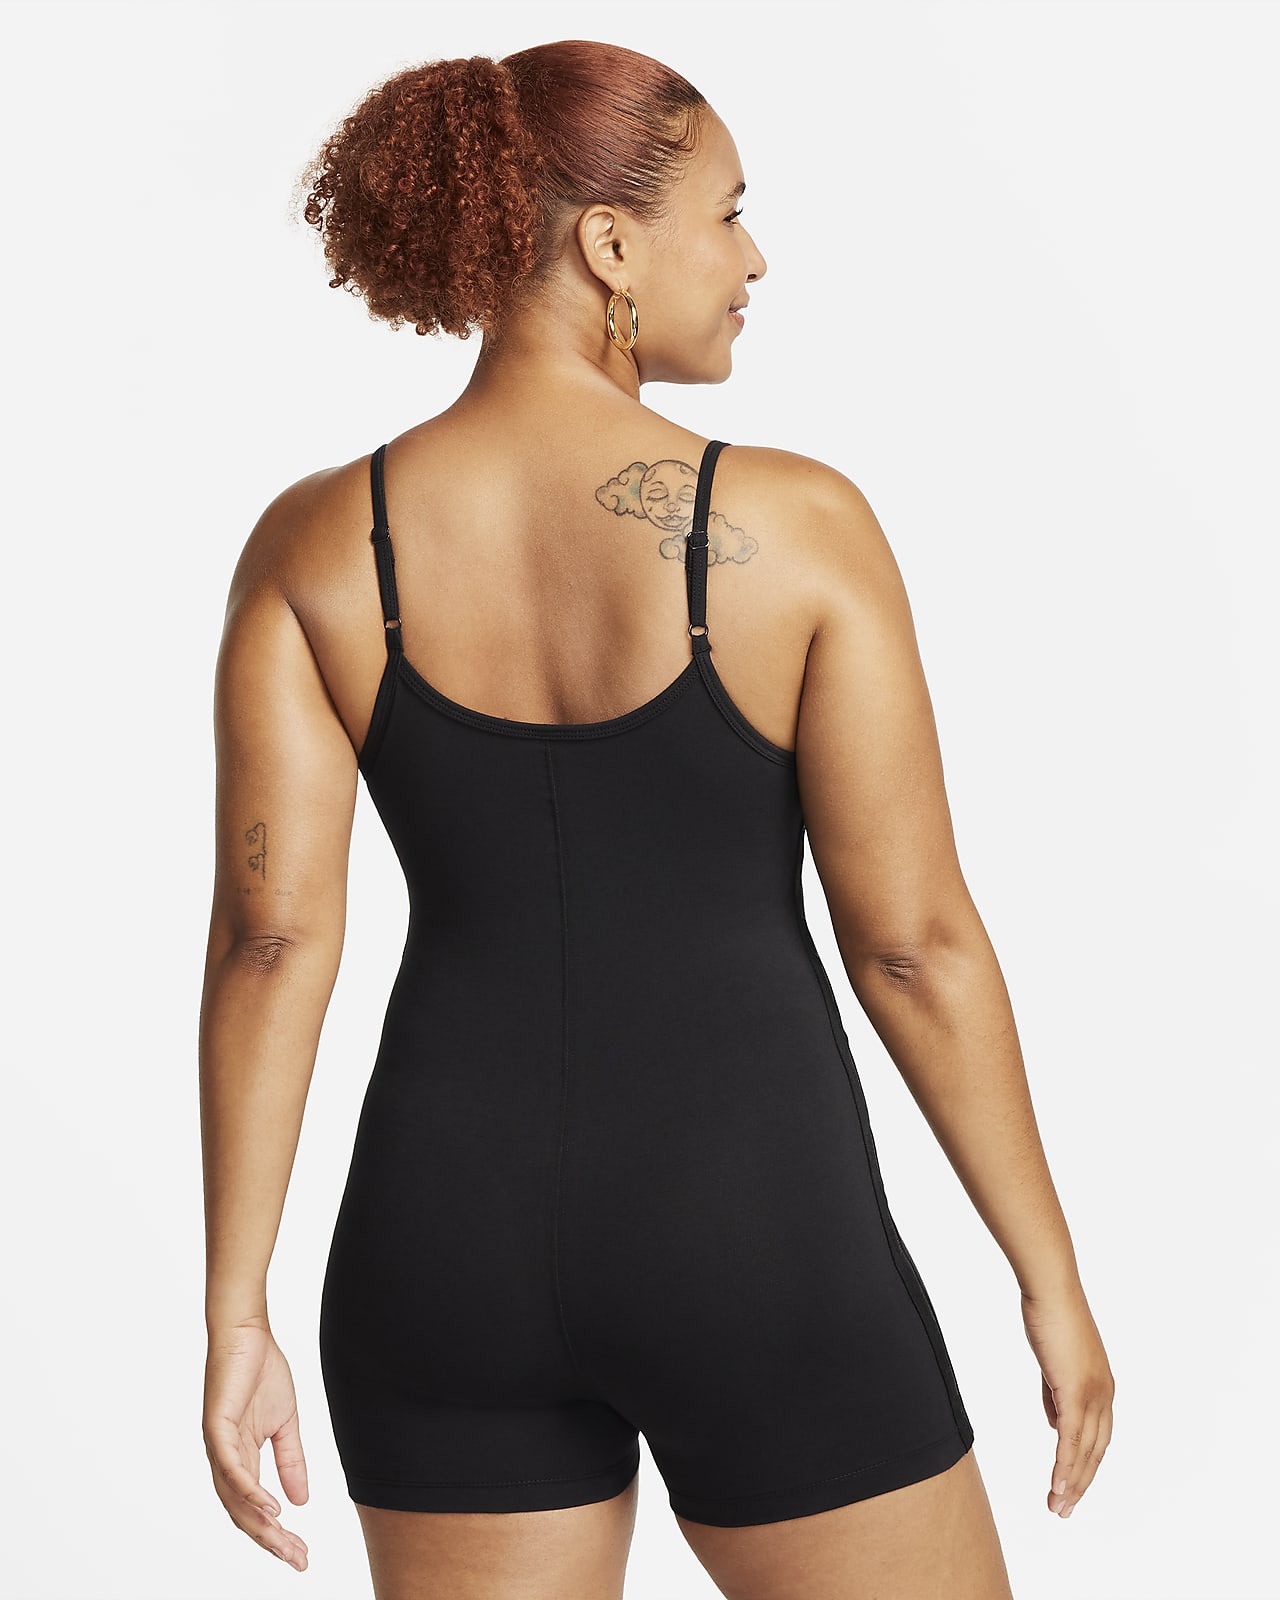 The Best Nike Workout Bodysuits for Women. Nike CA